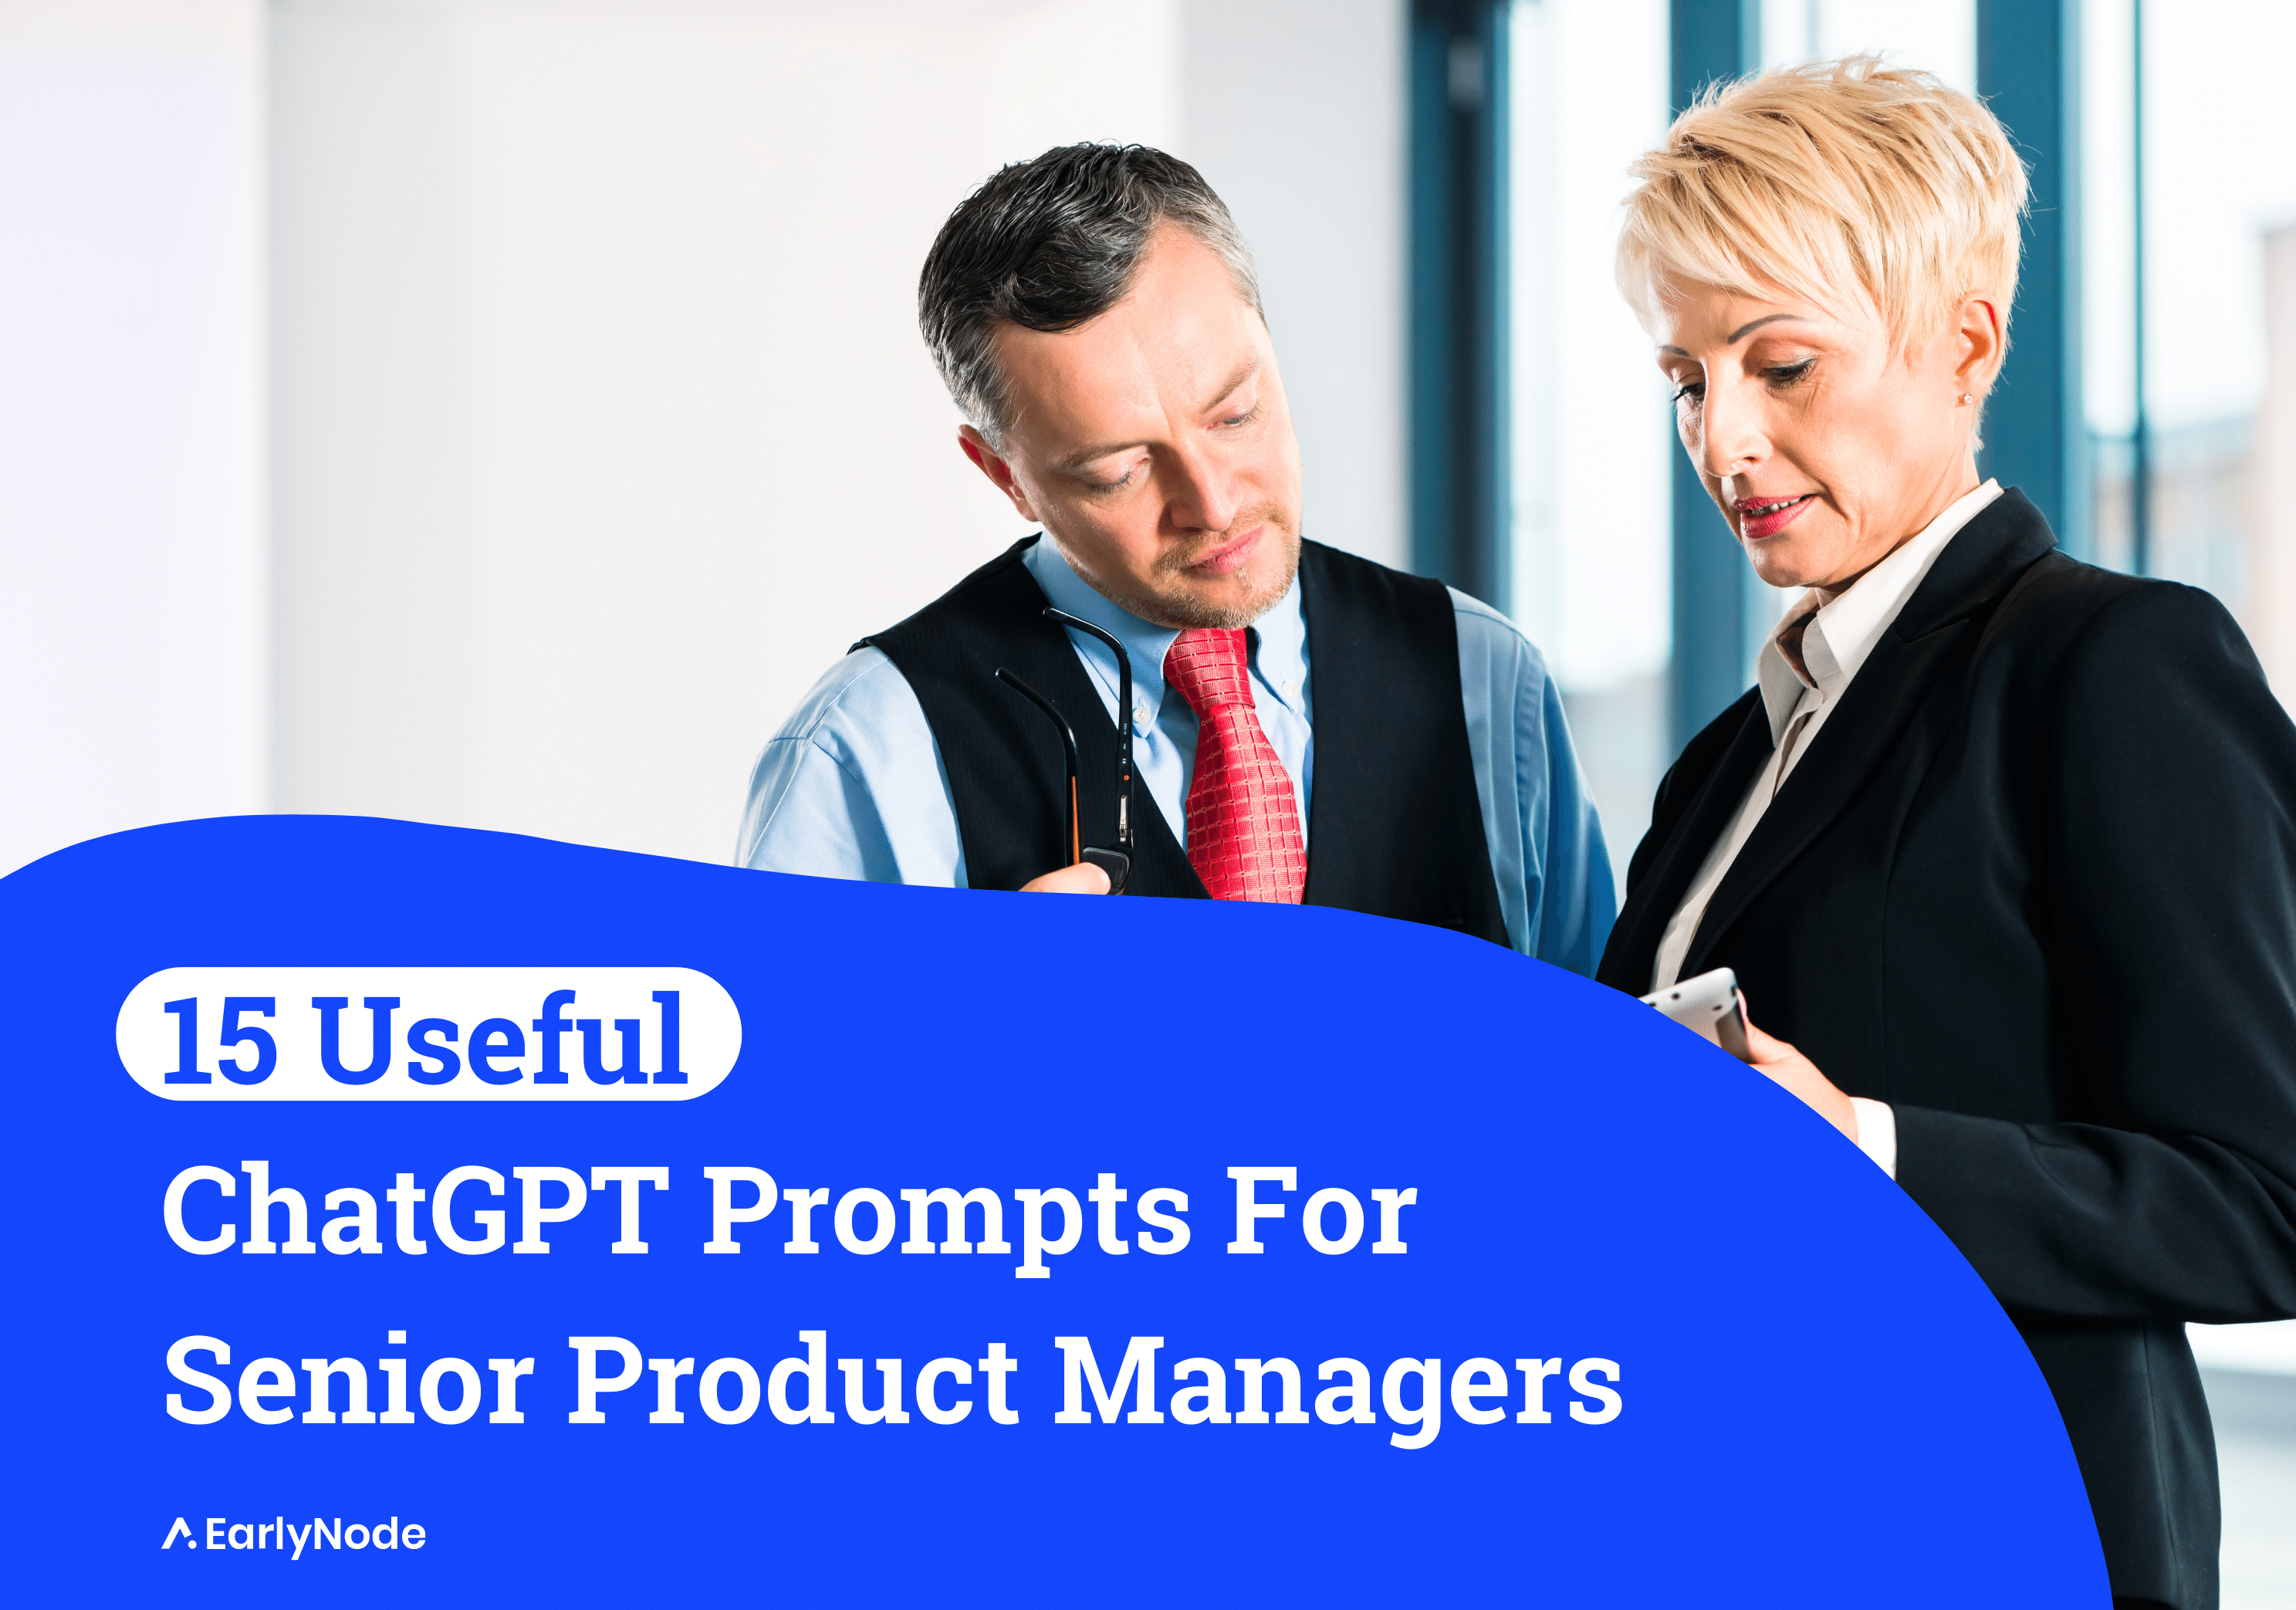 15 Useful ChatGPT Prompts For Senior Product Managers